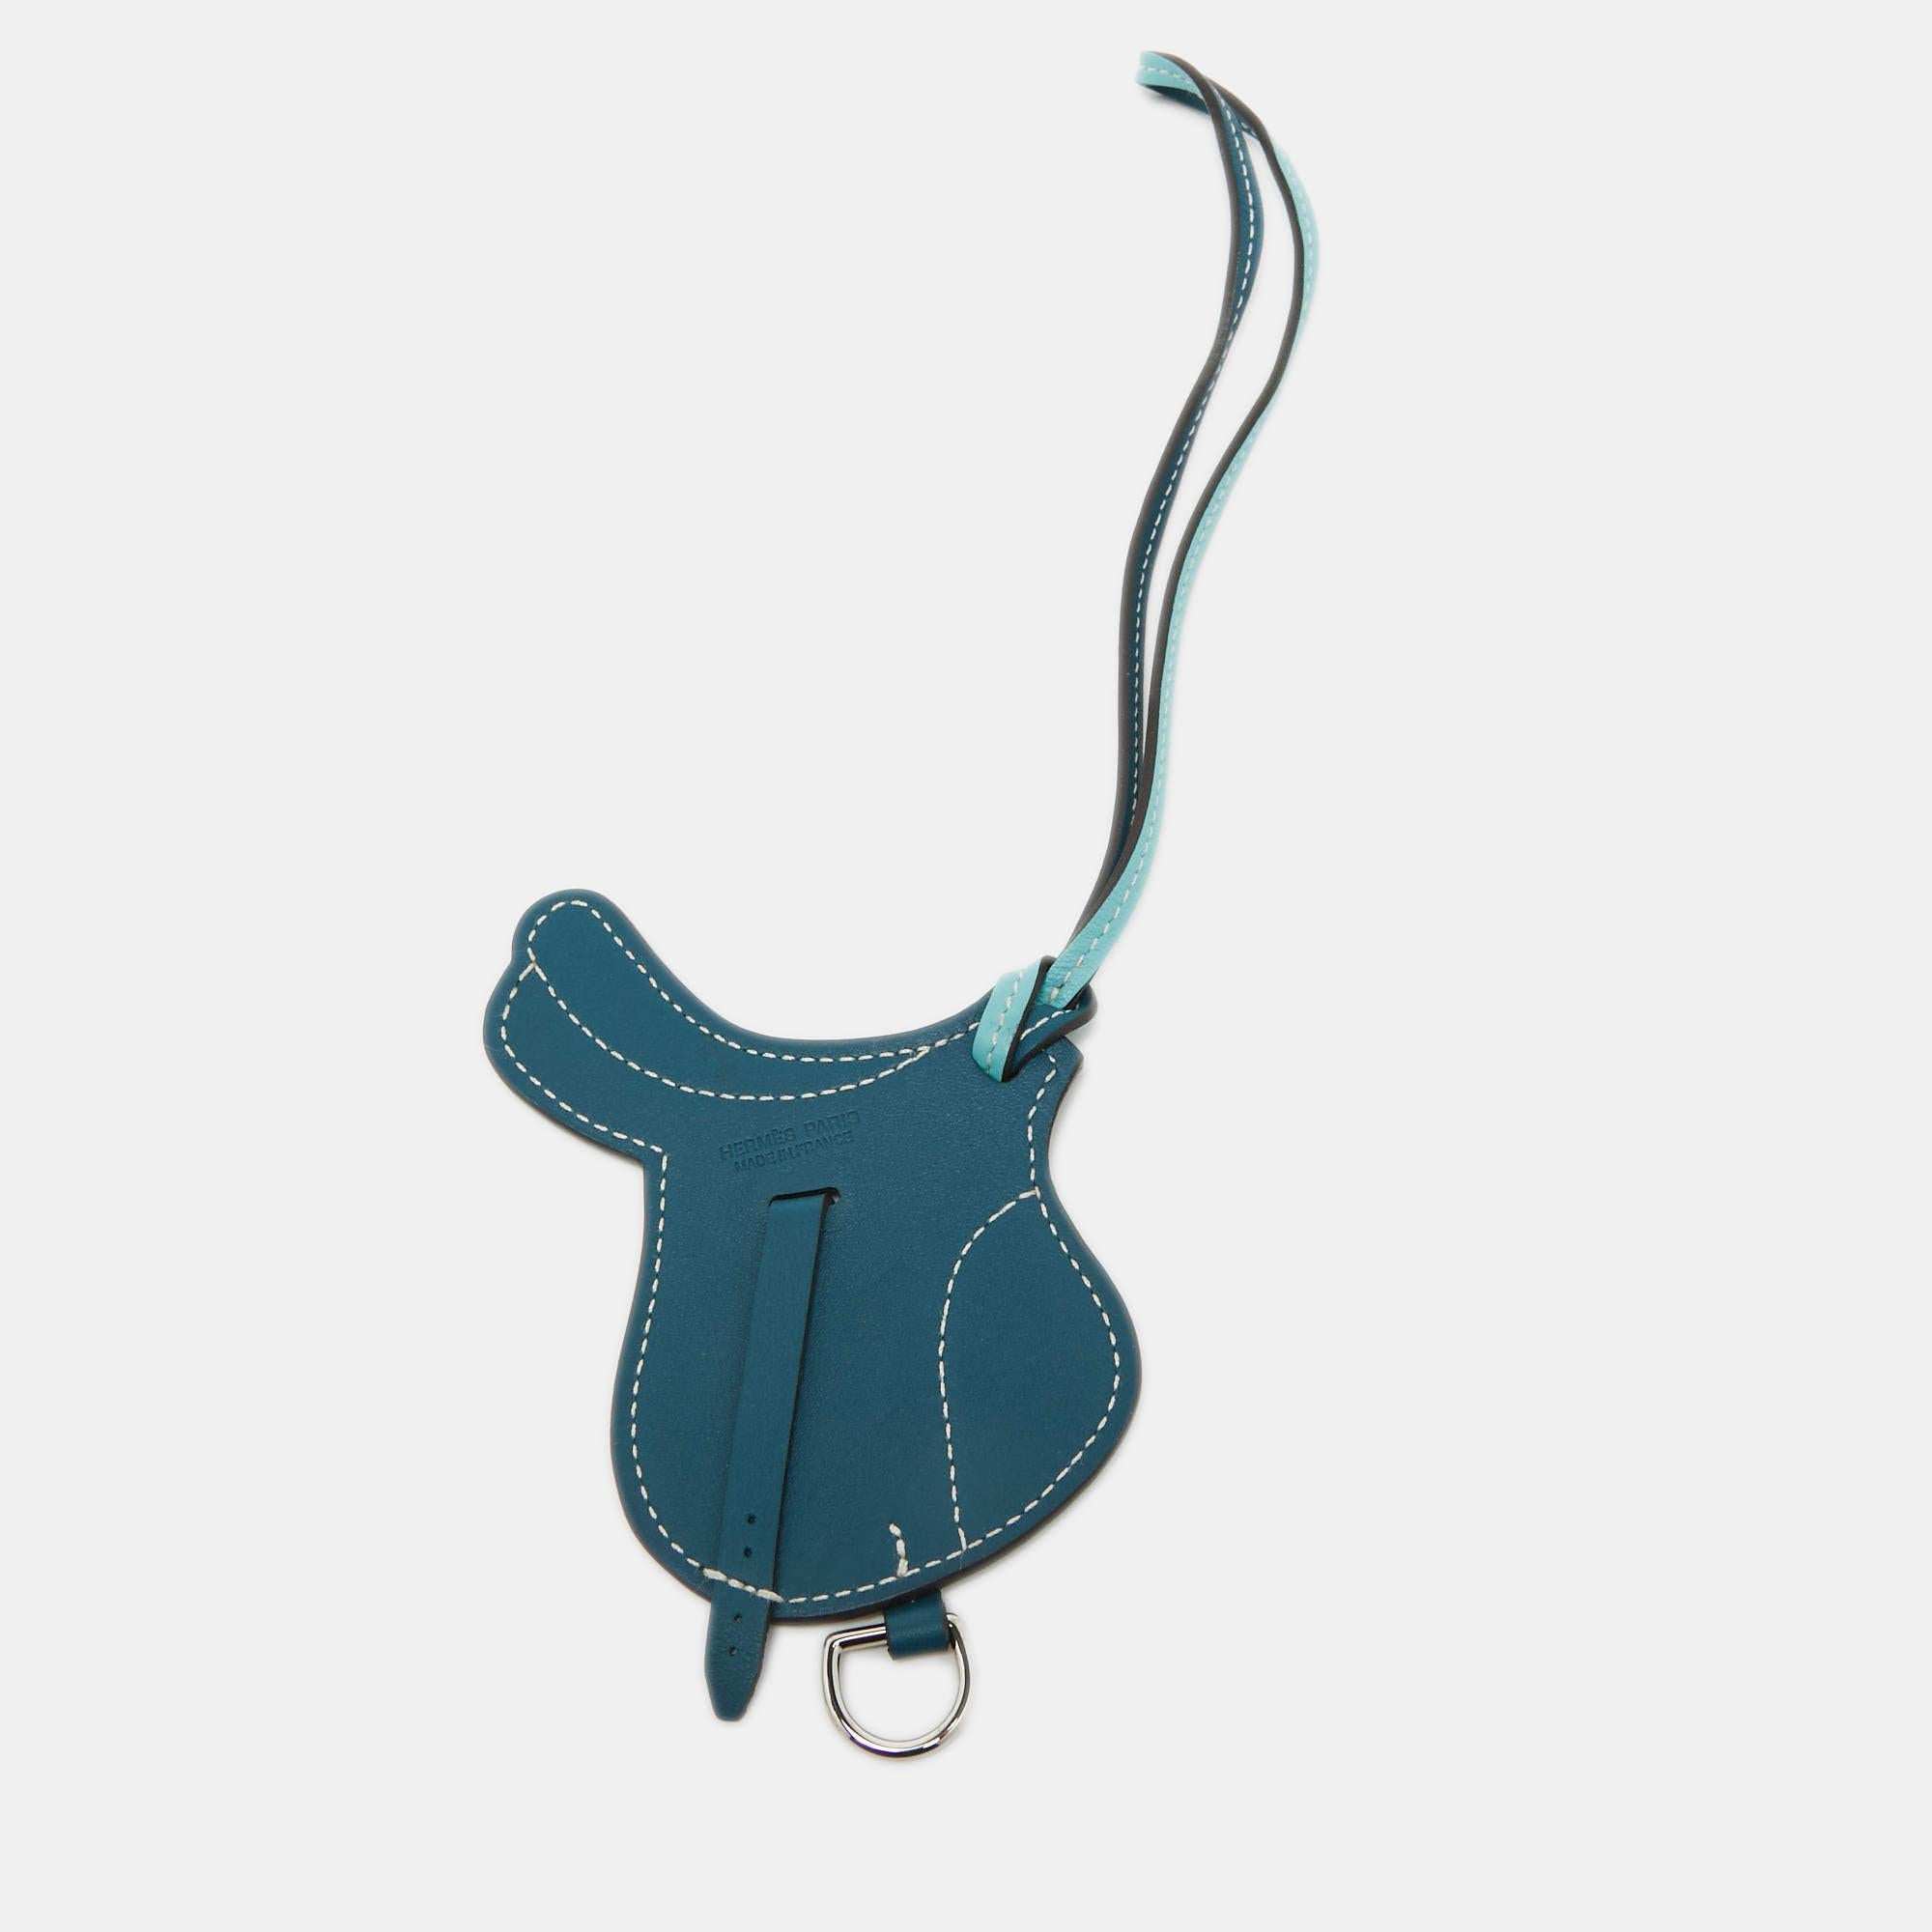 The Hermès Paddock Selle bag charm is an exquisite accessory crafted from luxurious Swift Leather. Its design features a luxe shade. This charming piece perfectly complements any Hermès bag, adding a touch of elegance and sophistication.

